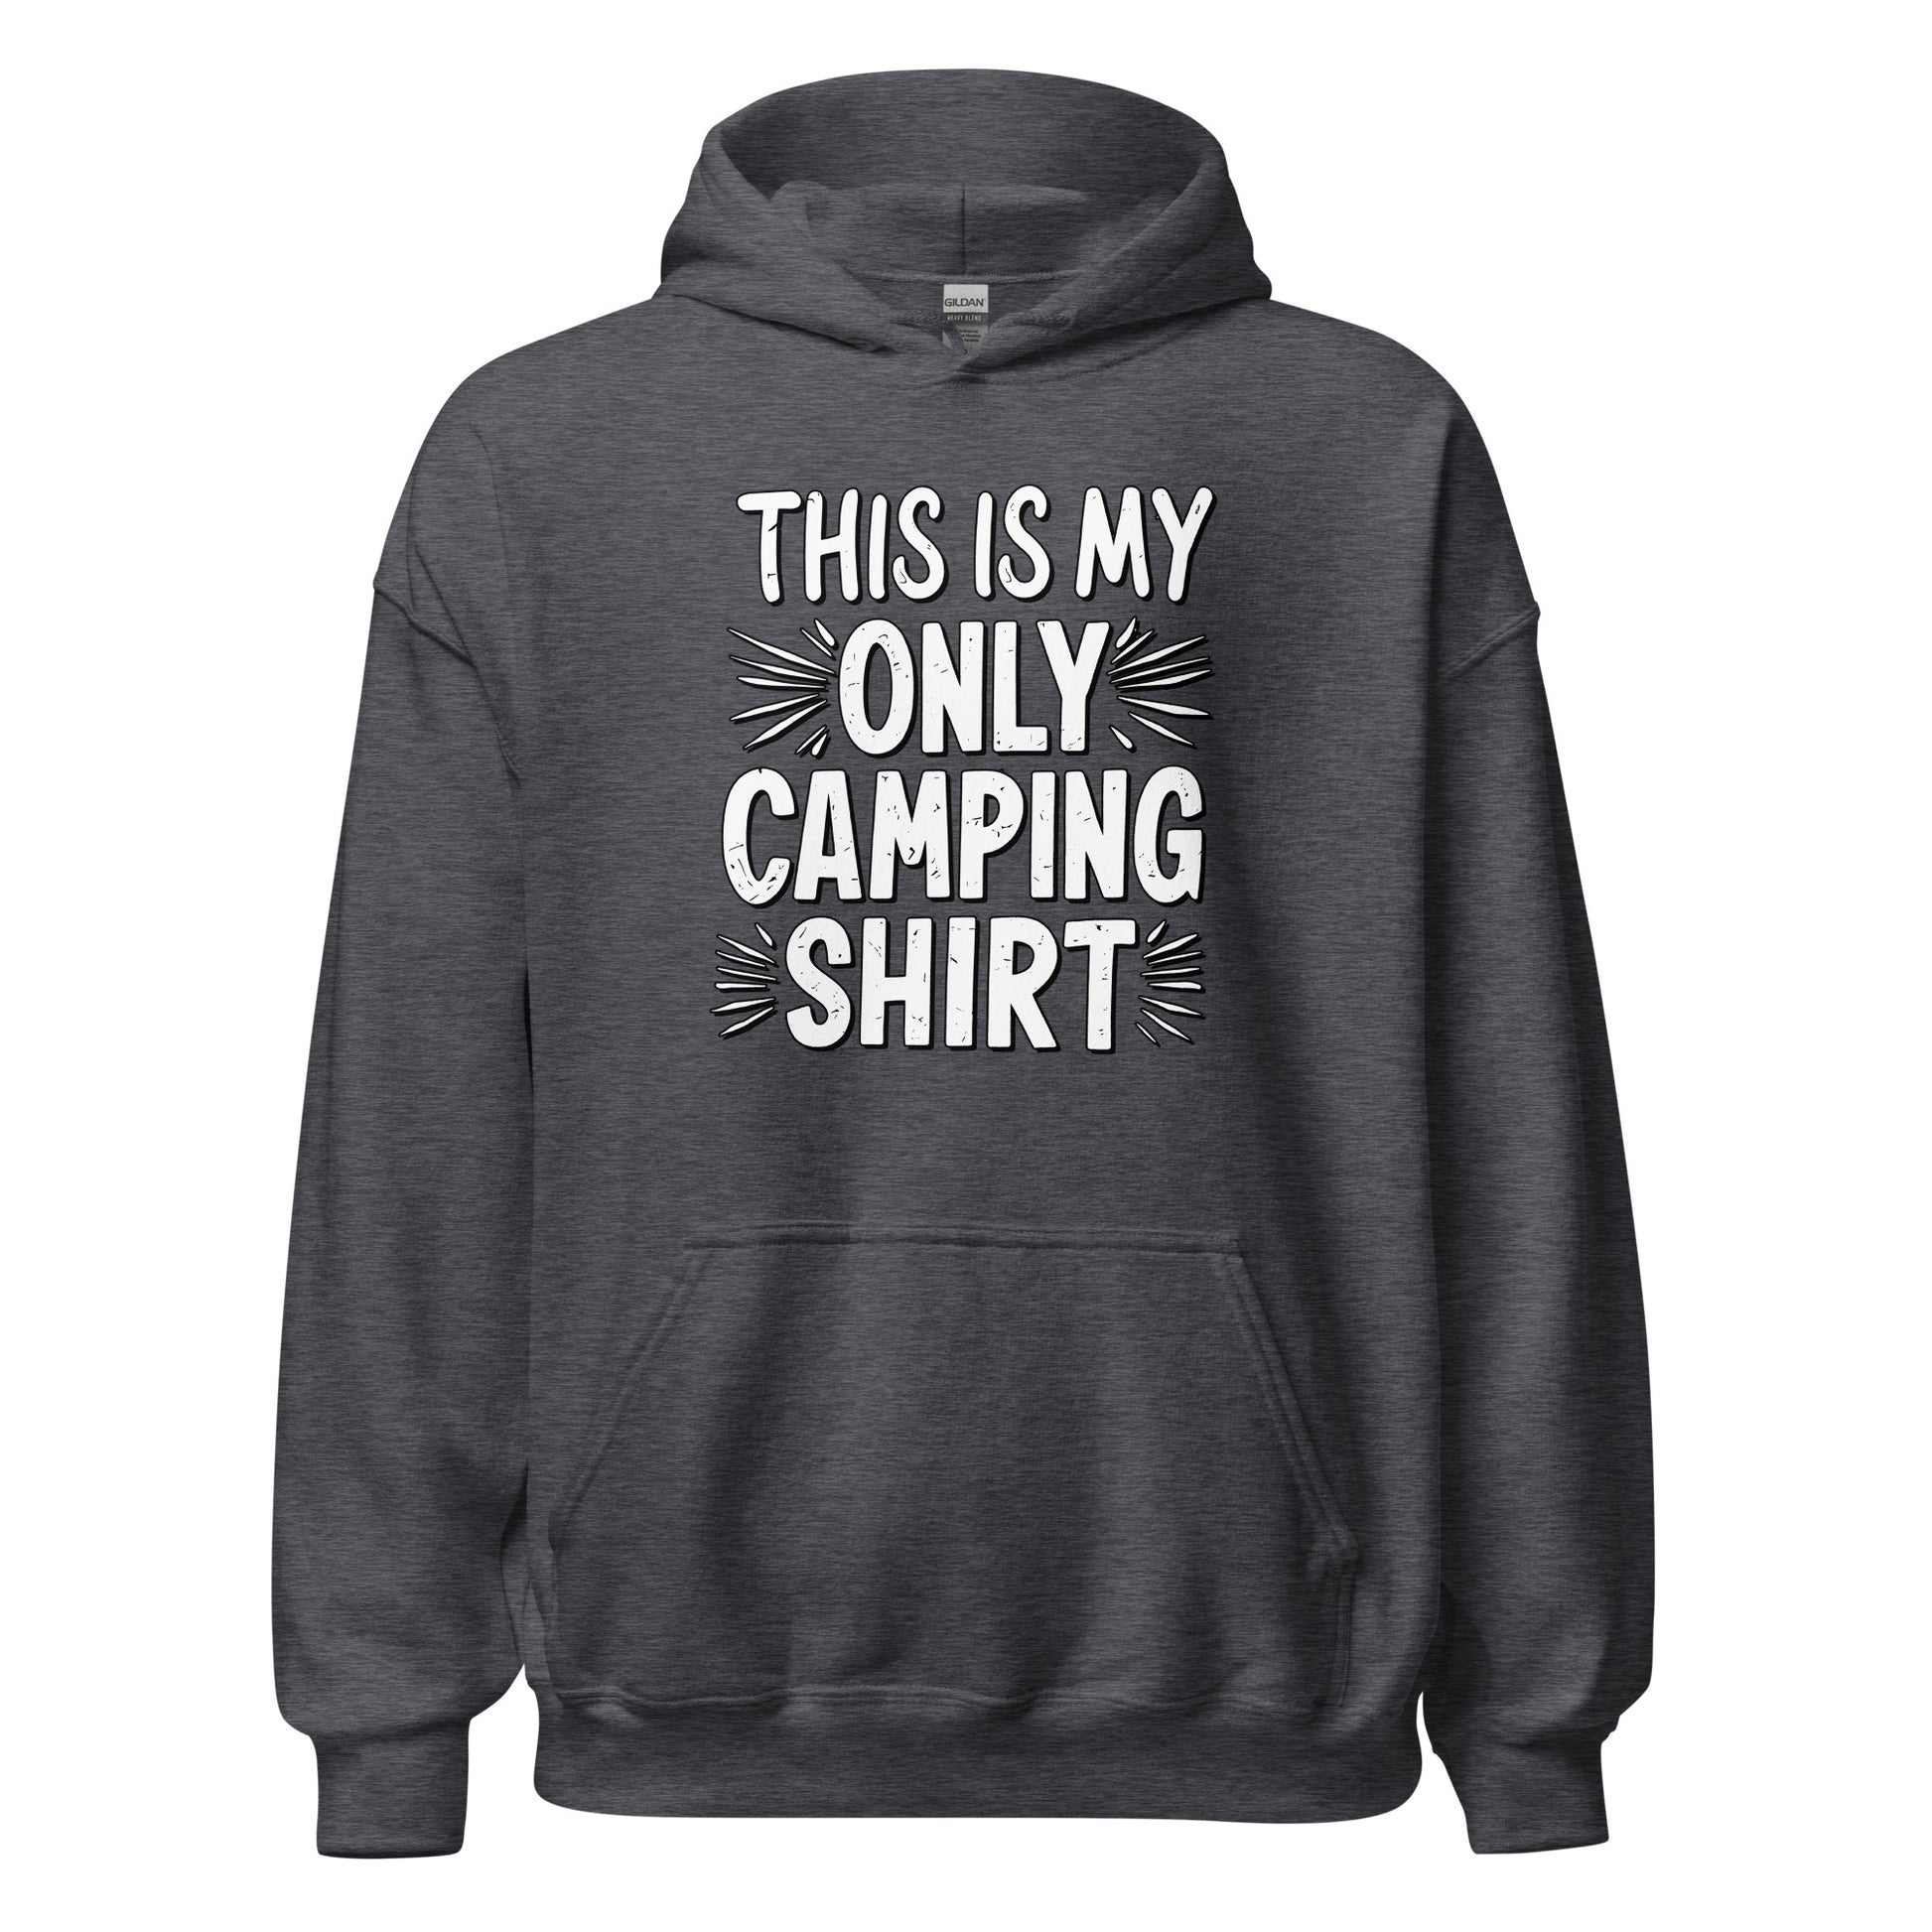 This is my only camping t-shirt hoodie printed by Whistler Shirts